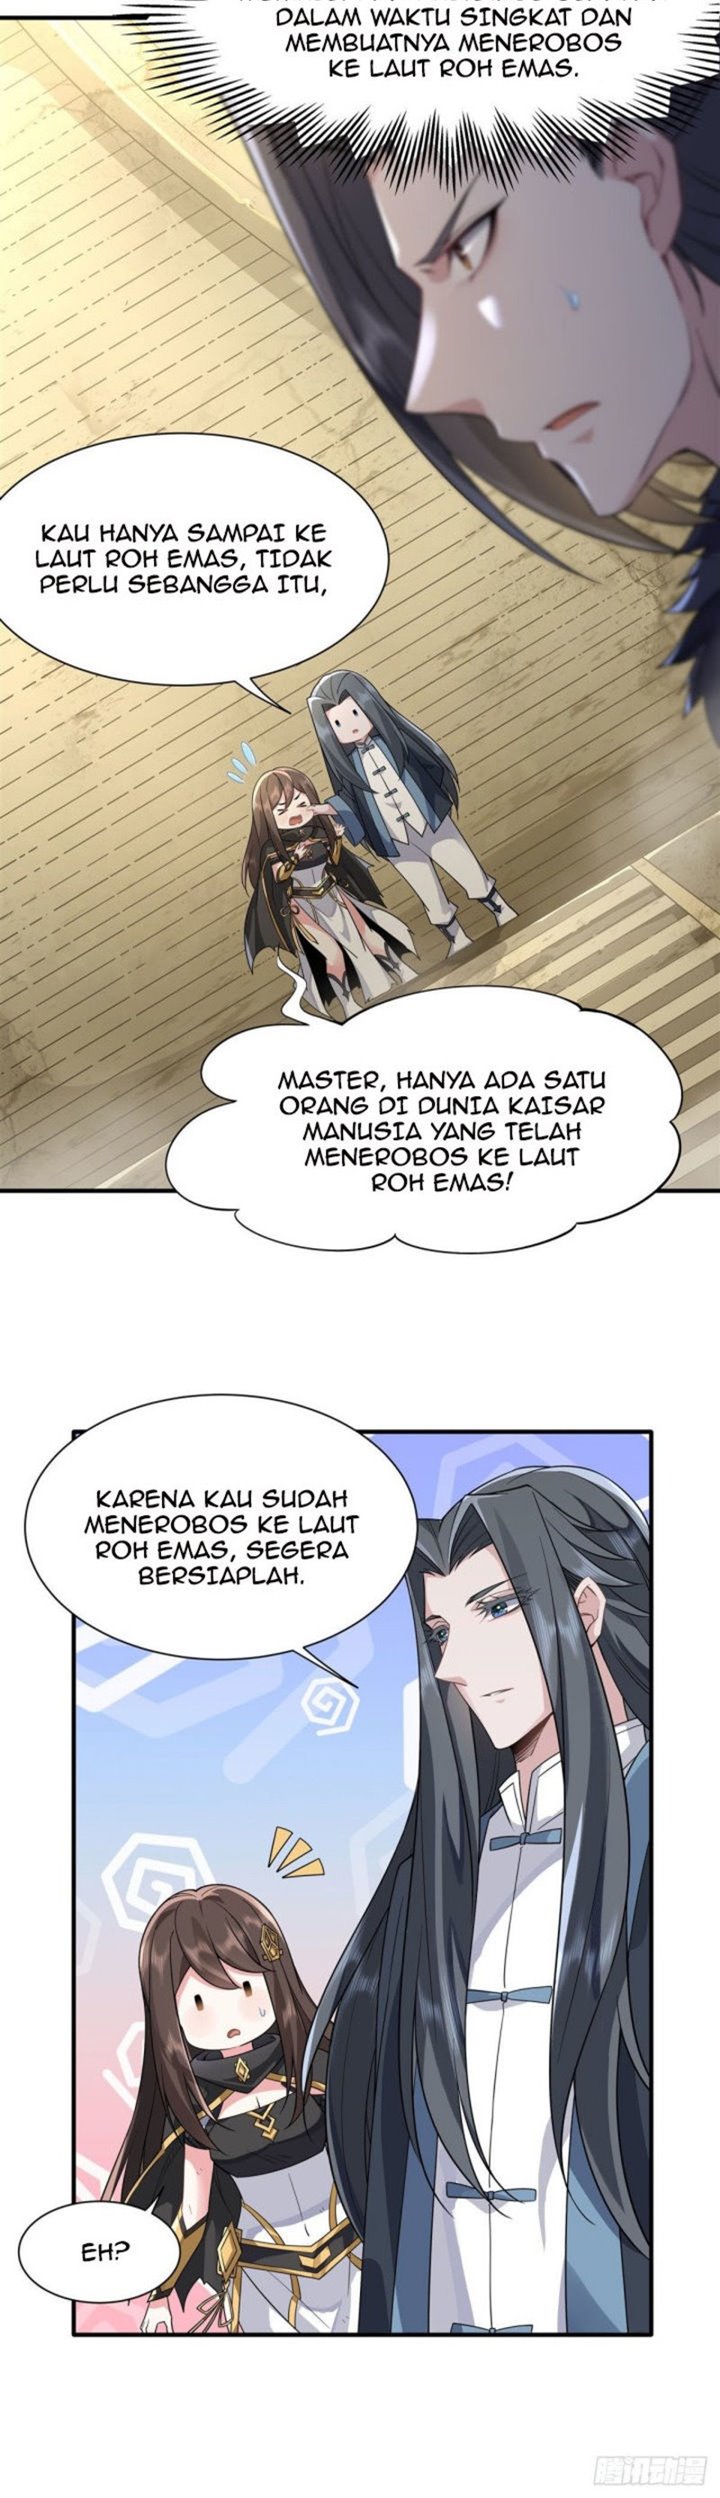 Dilarang COPAS - situs resmi www.mangacanblog.com - Komik my female apprentices are all big shots from the future 015 - chapter 15 16 Indonesia my female apprentices are all big shots from the future 015 - chapter 15 Terbaru 20|Baca Manga Komik Indonesia|Mangacan